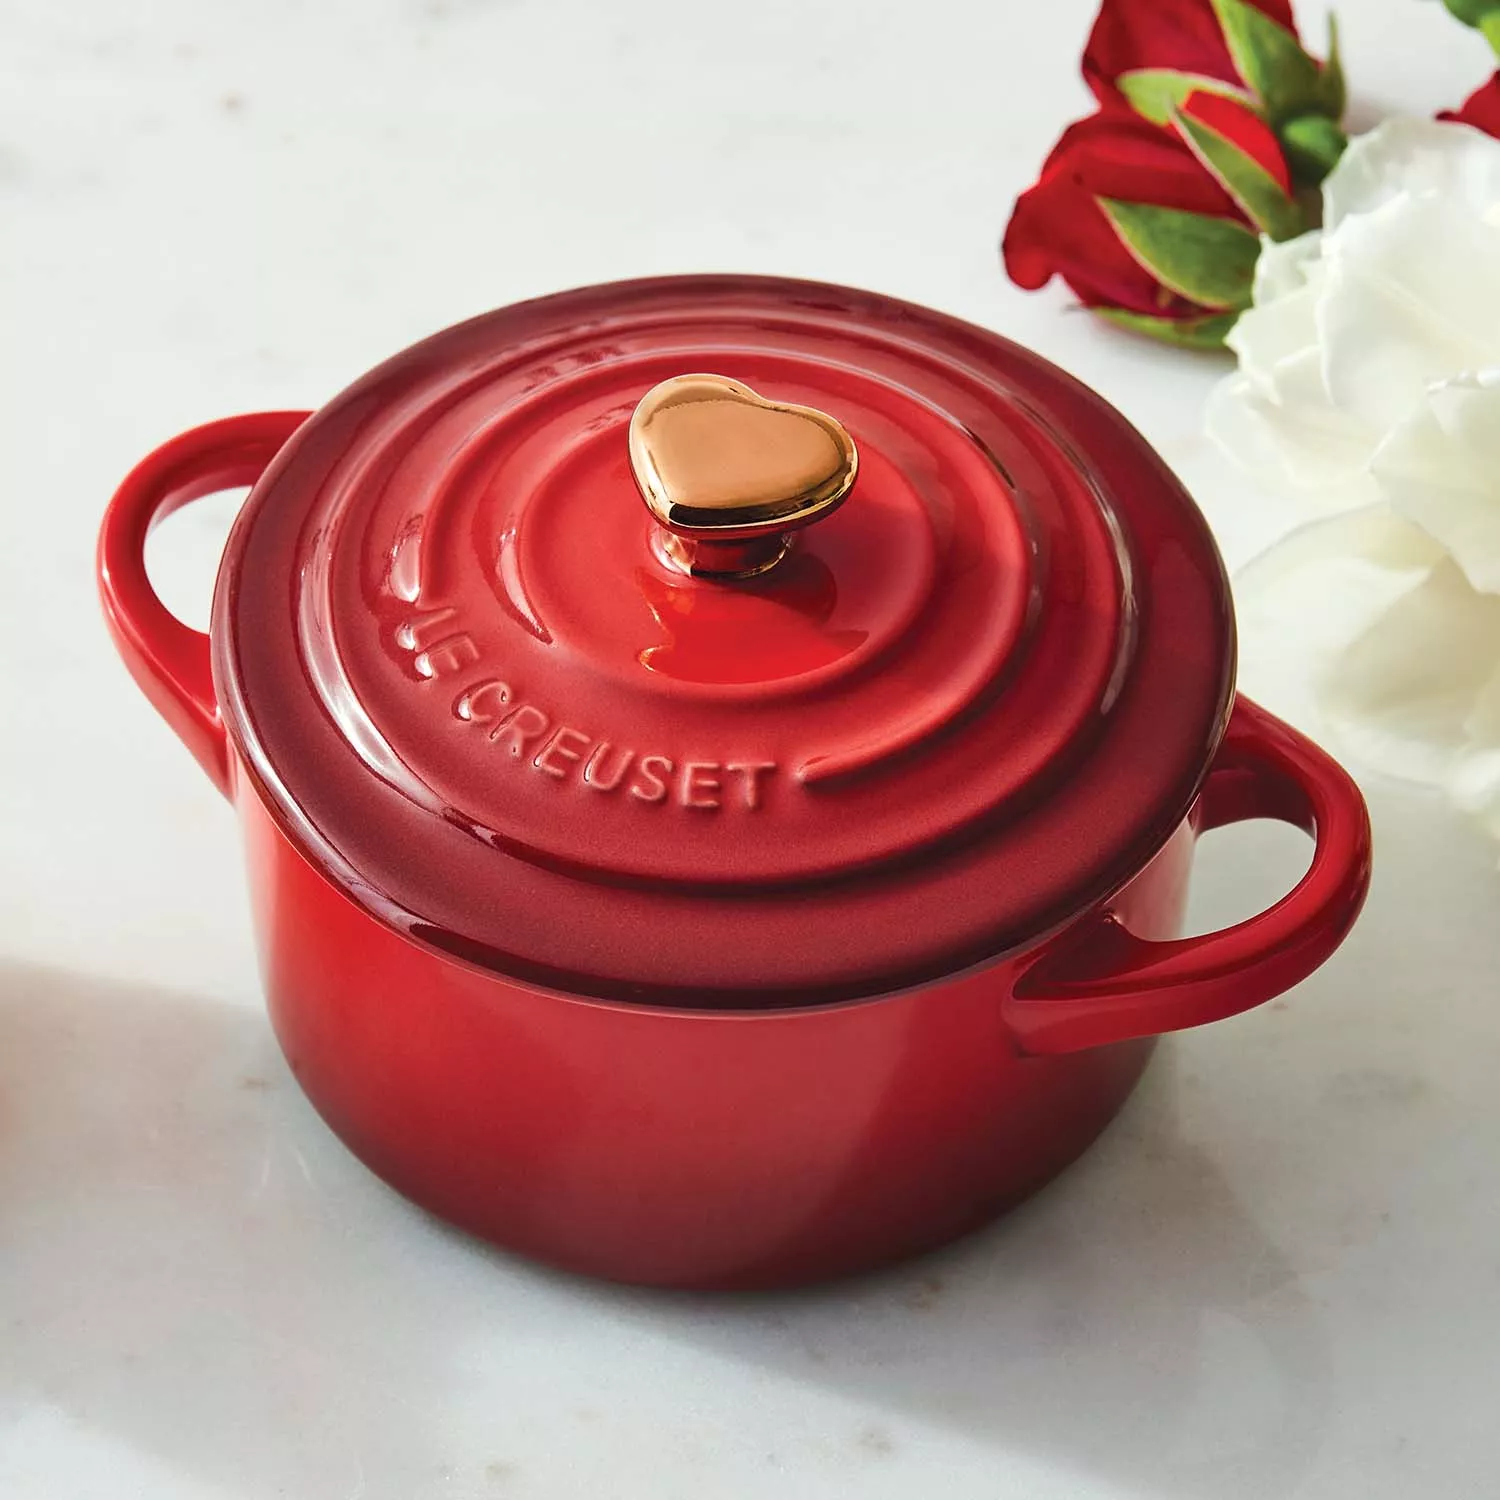 Le Creuset Is Selling Heart-Shaped Cookware in Time for